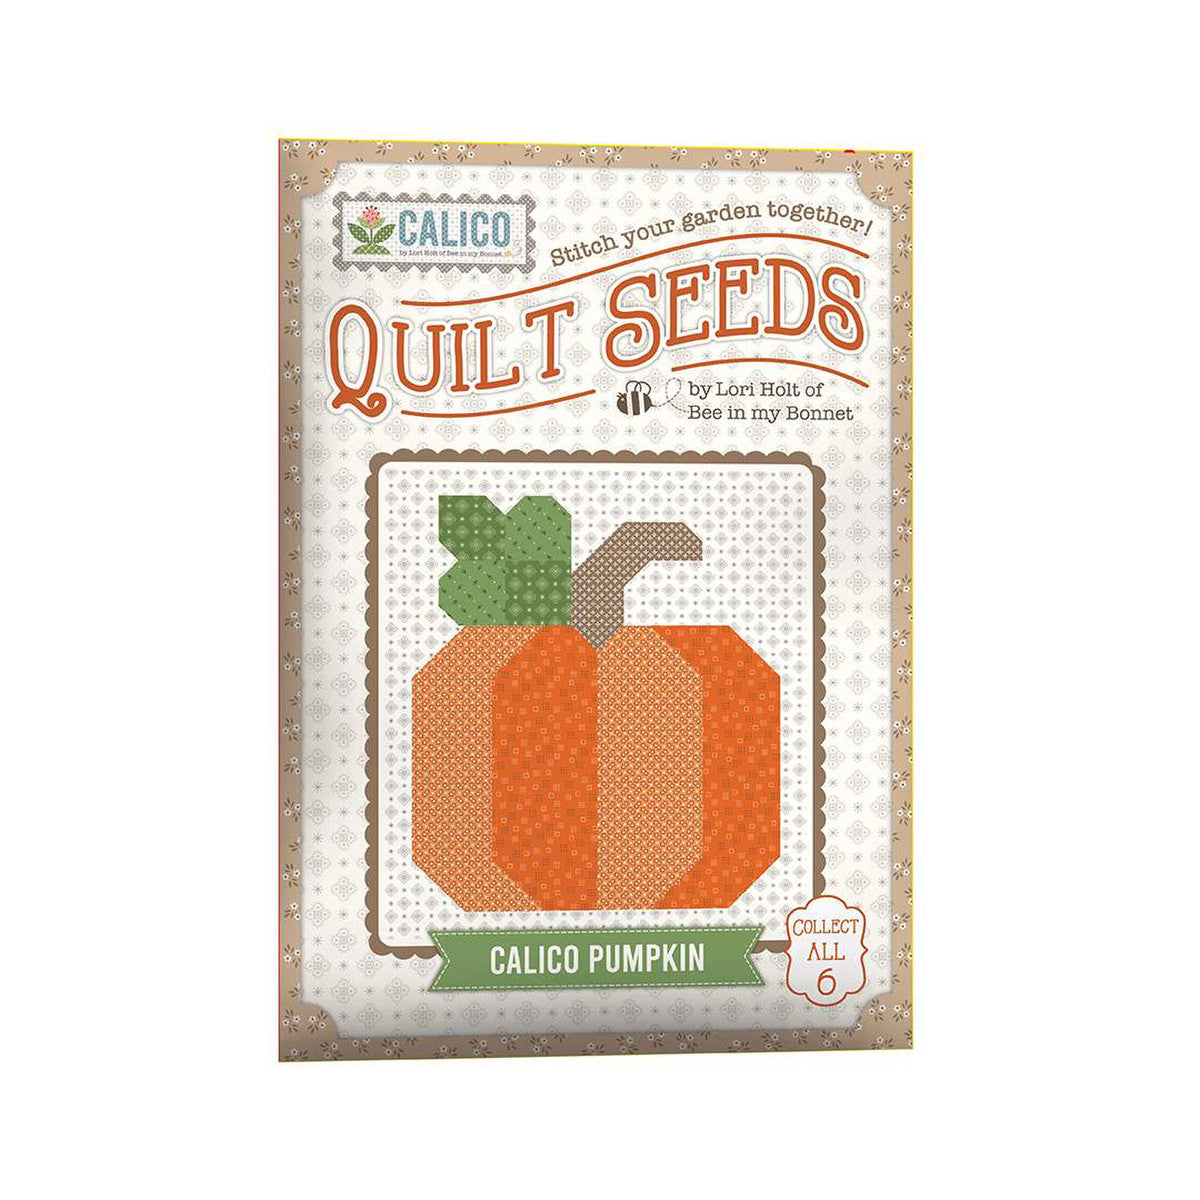 Calico Pumpkin Quilt Seed